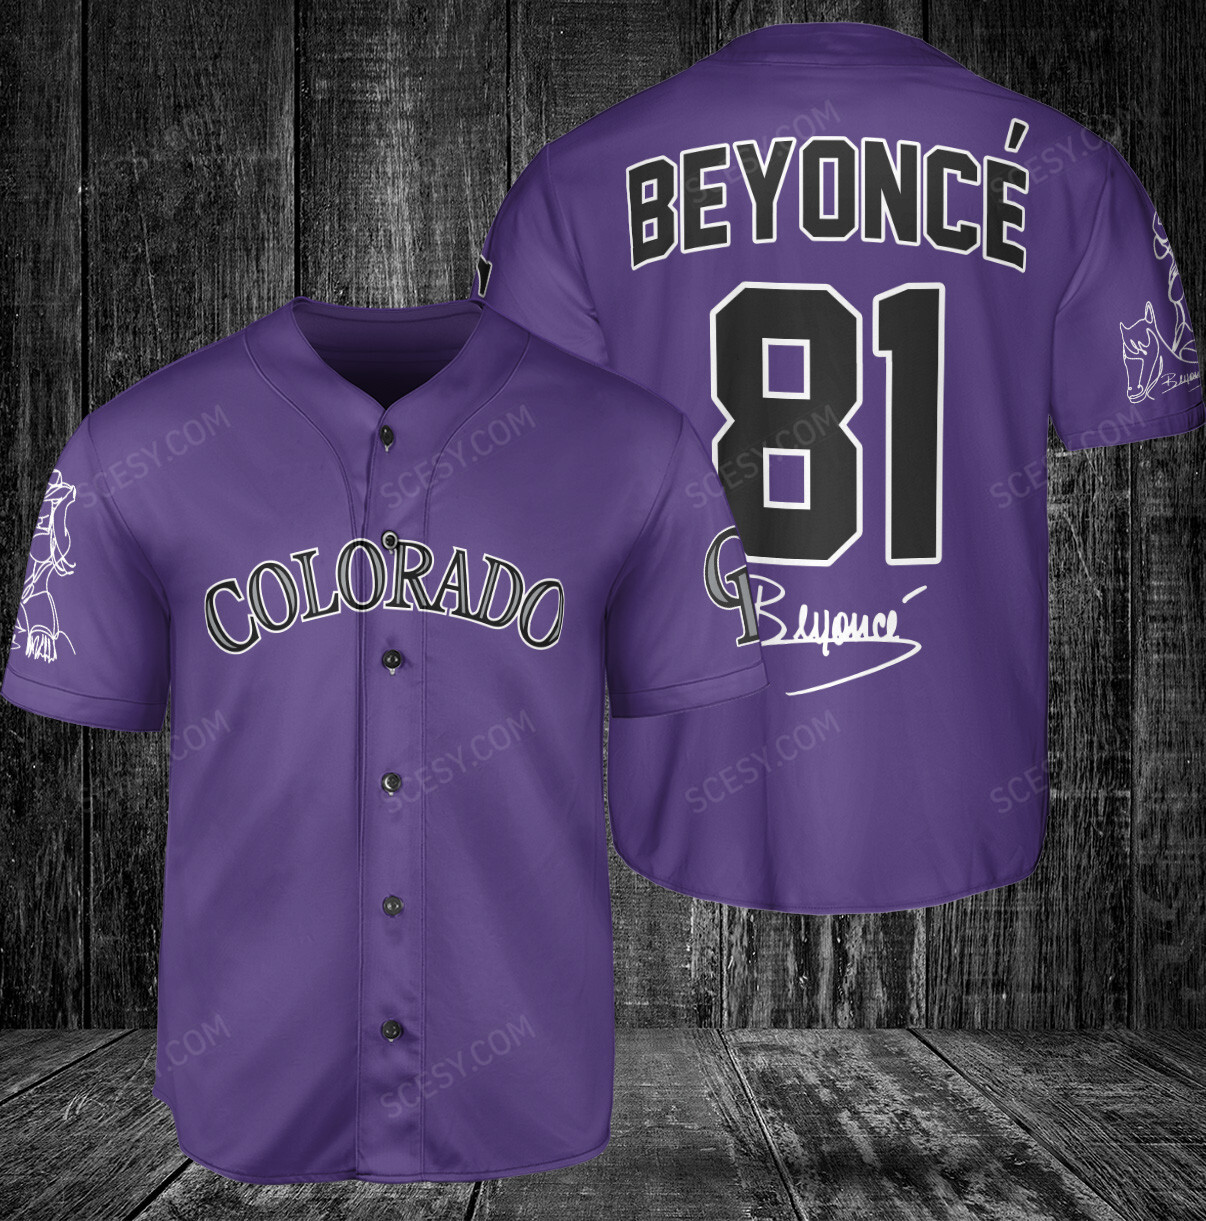 Get Your Gray Atlanta Braves Beyonce Baseball Jersey Now! - Scesy